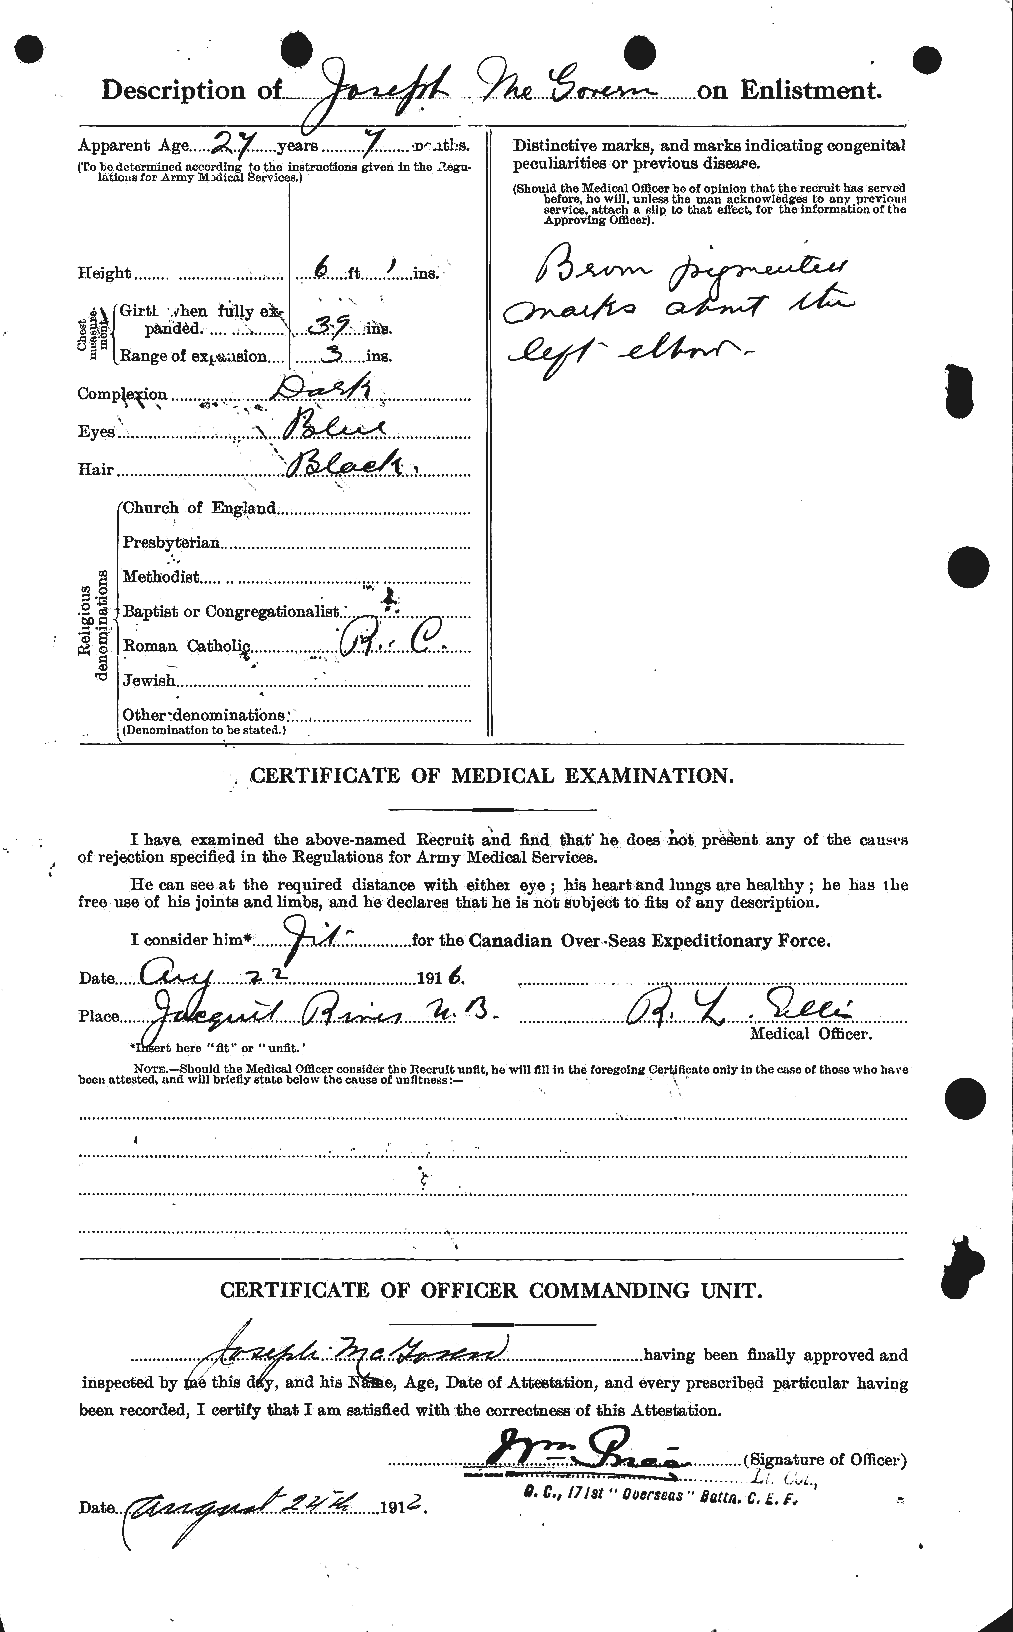 Personnel Records of the First World War - CEF 528579b